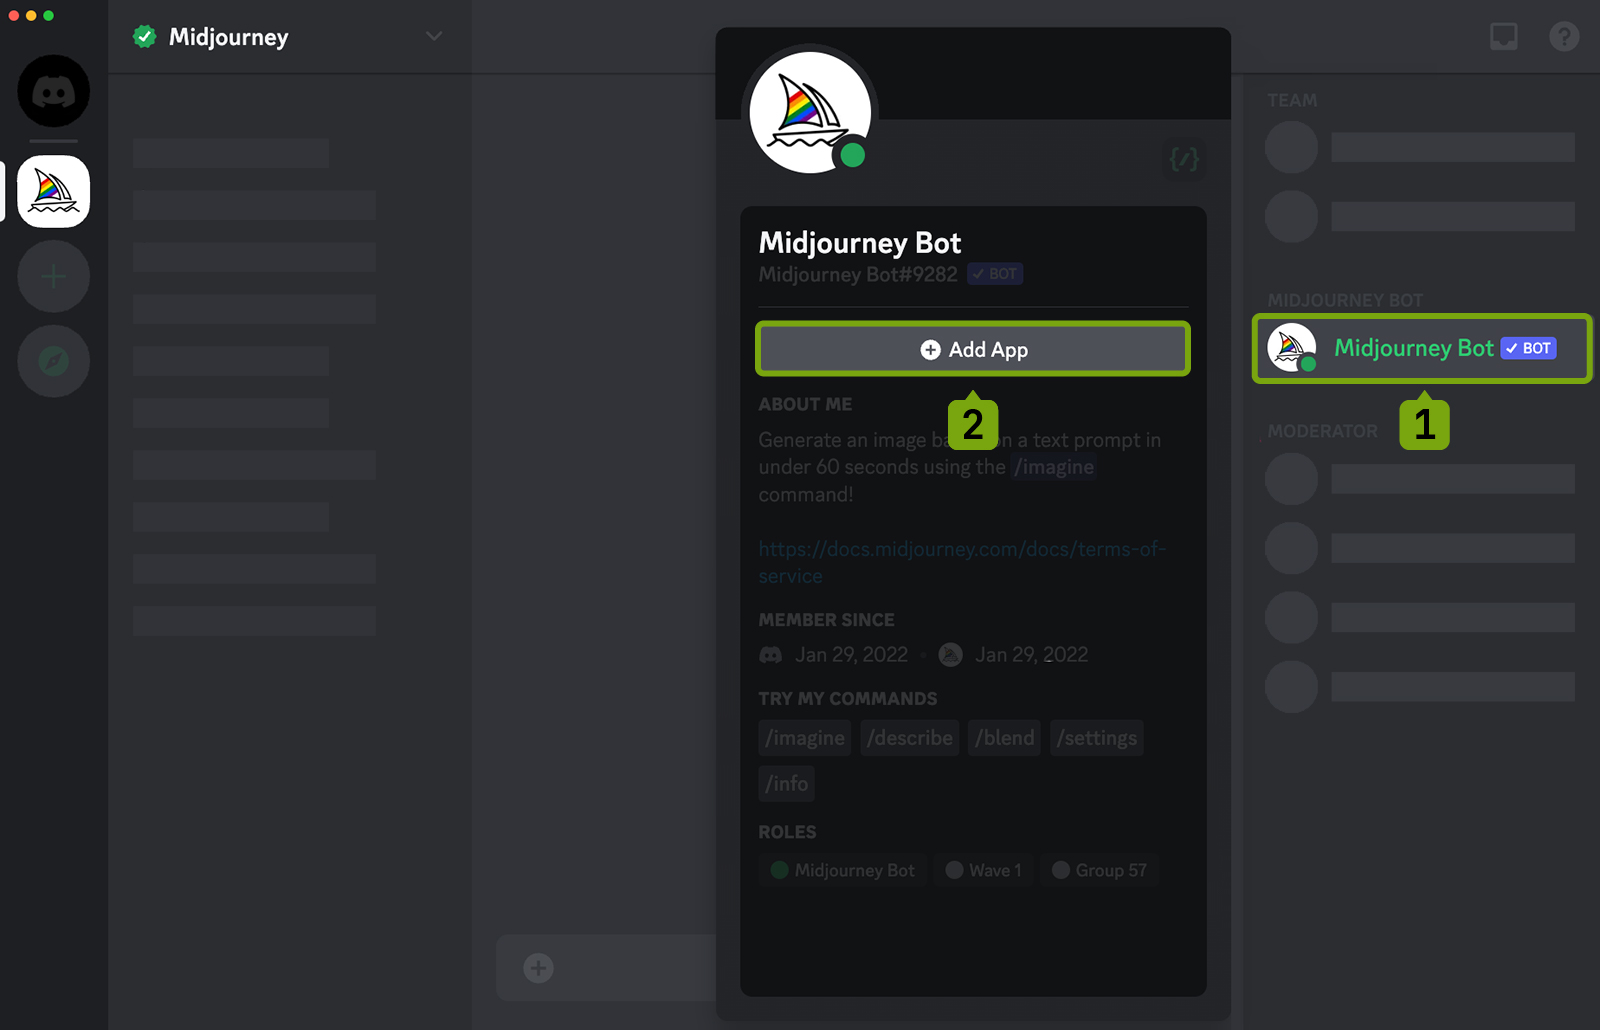 a screen shot showing the Midjourney Discord. The Midjourney Bot is highlighted on the left side user list with a number one under it. A pop-up showing the Midjourney Bot Add App is also visible. The Add App button is highlighted with a number two under it.